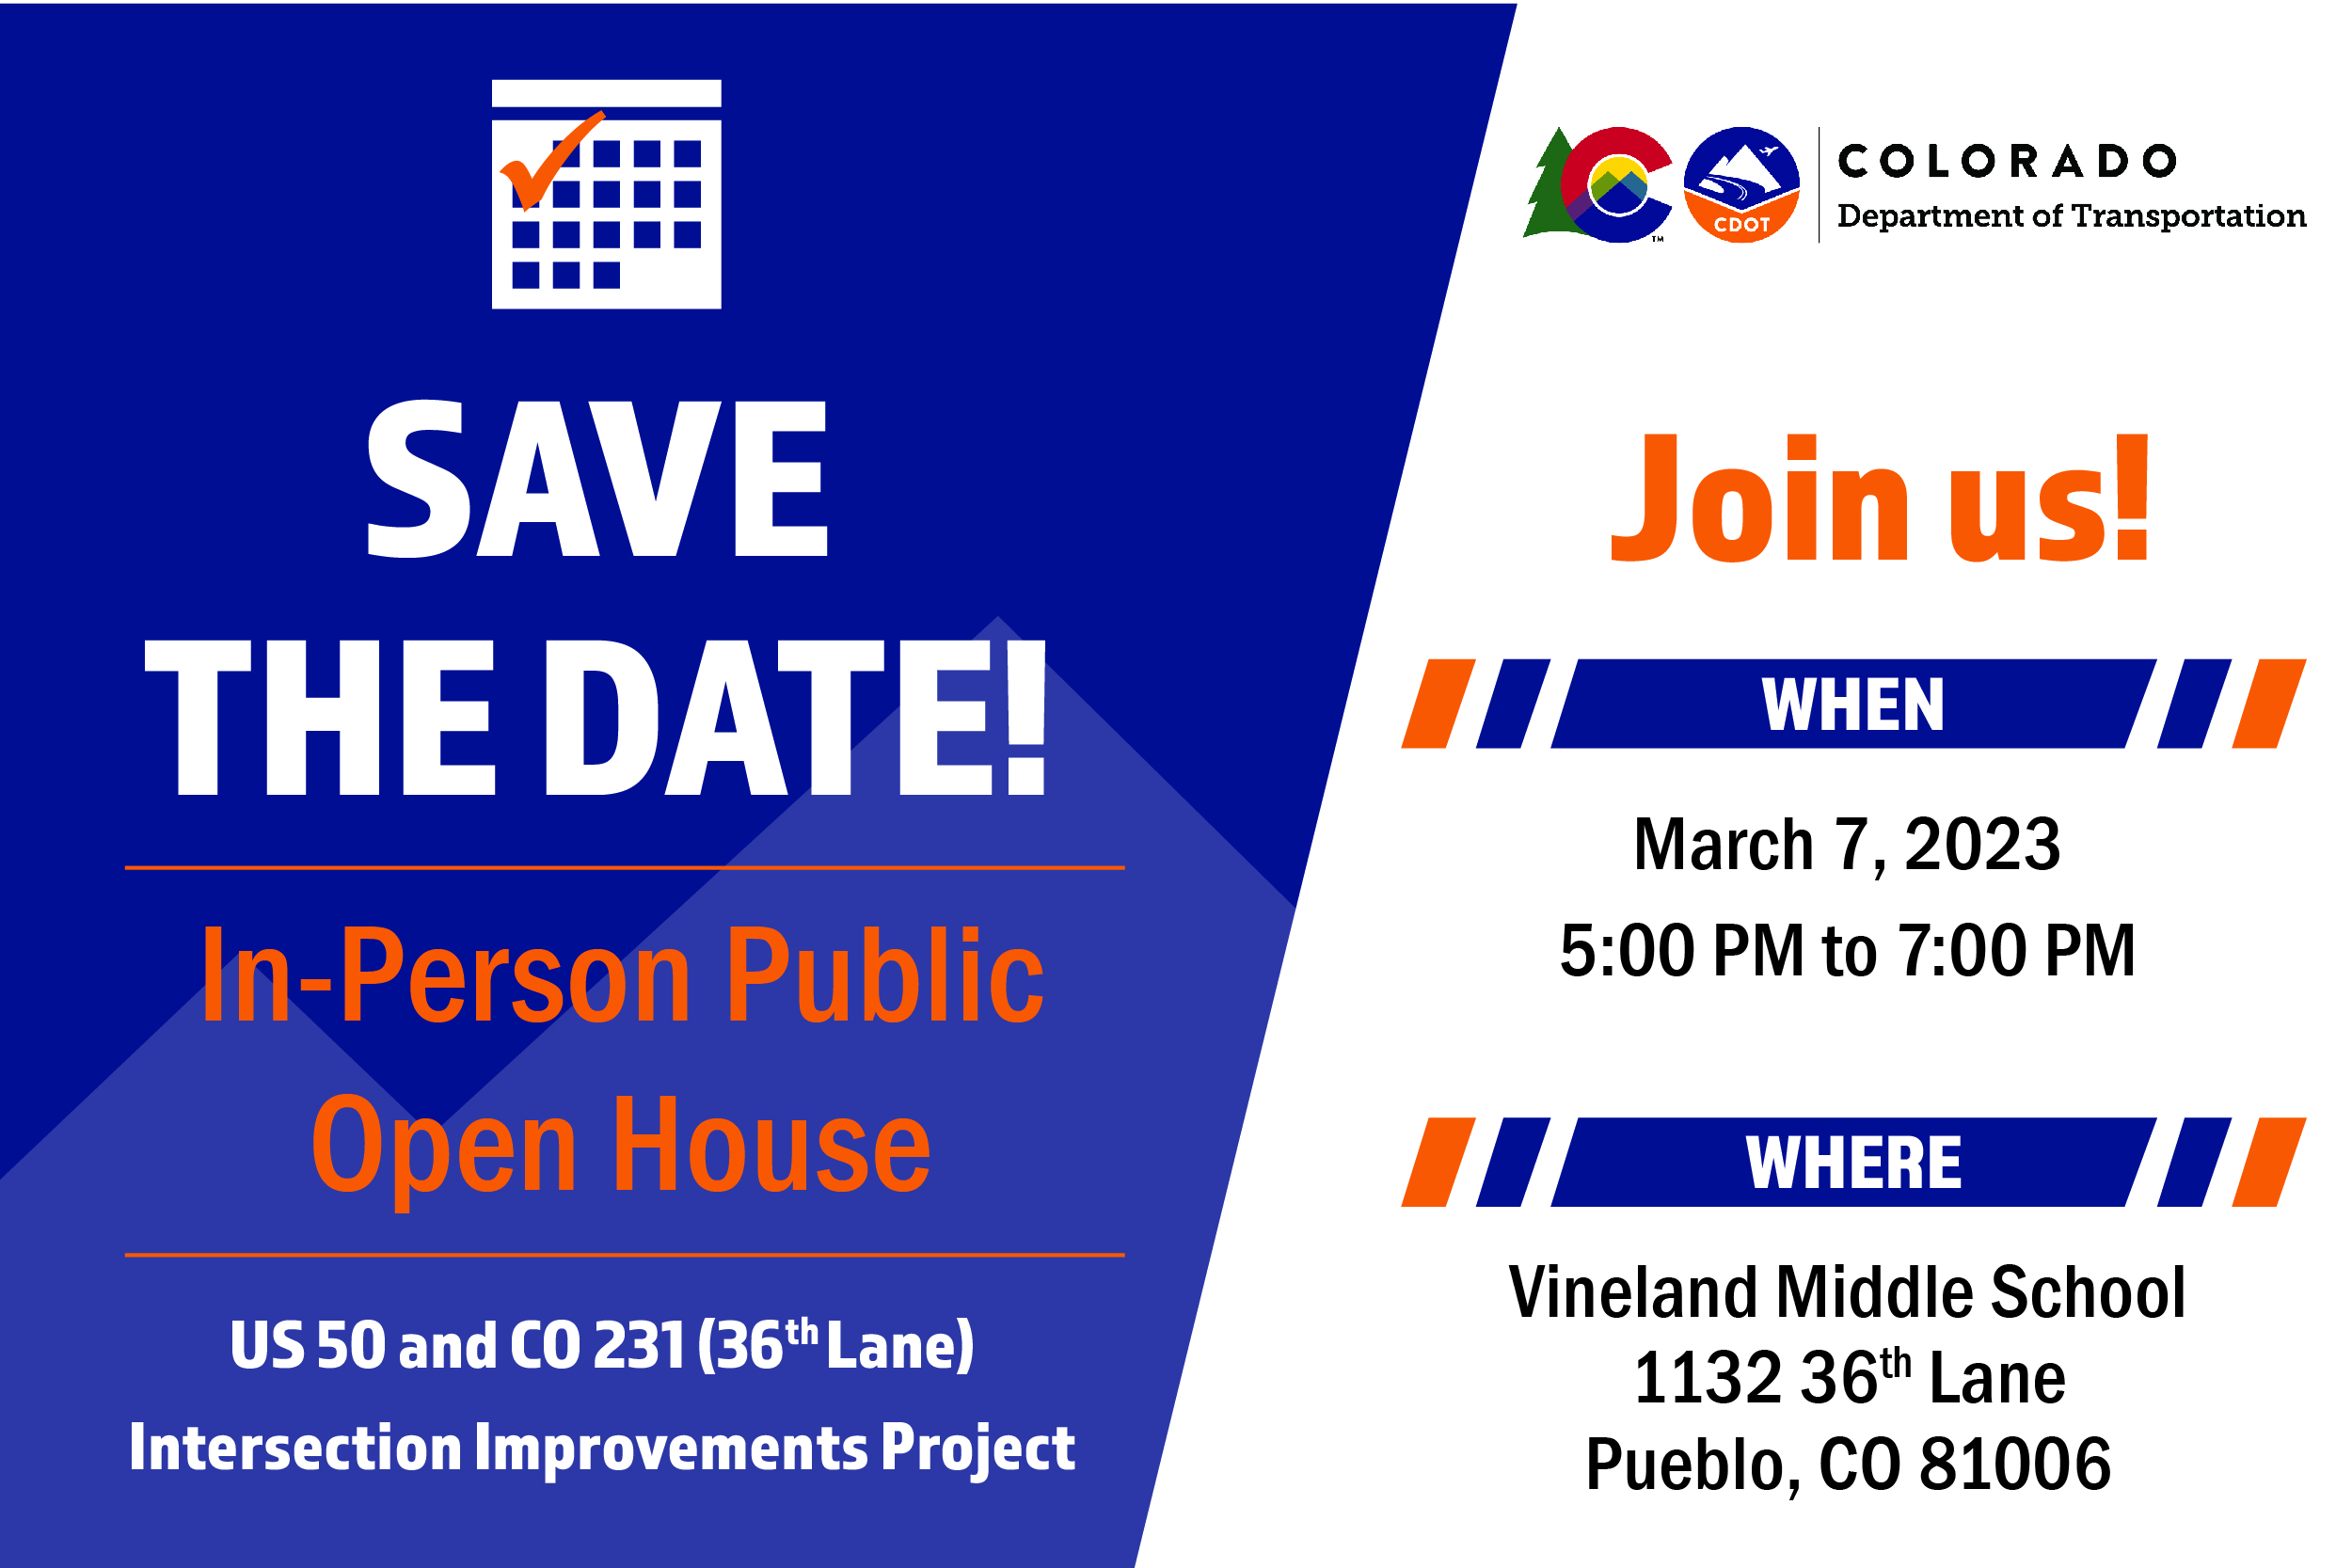 US 50 and CO 231 (36th Lane) Intersection Improvements Save the Date Public Meeting 2.7.23-01.jpg detail image